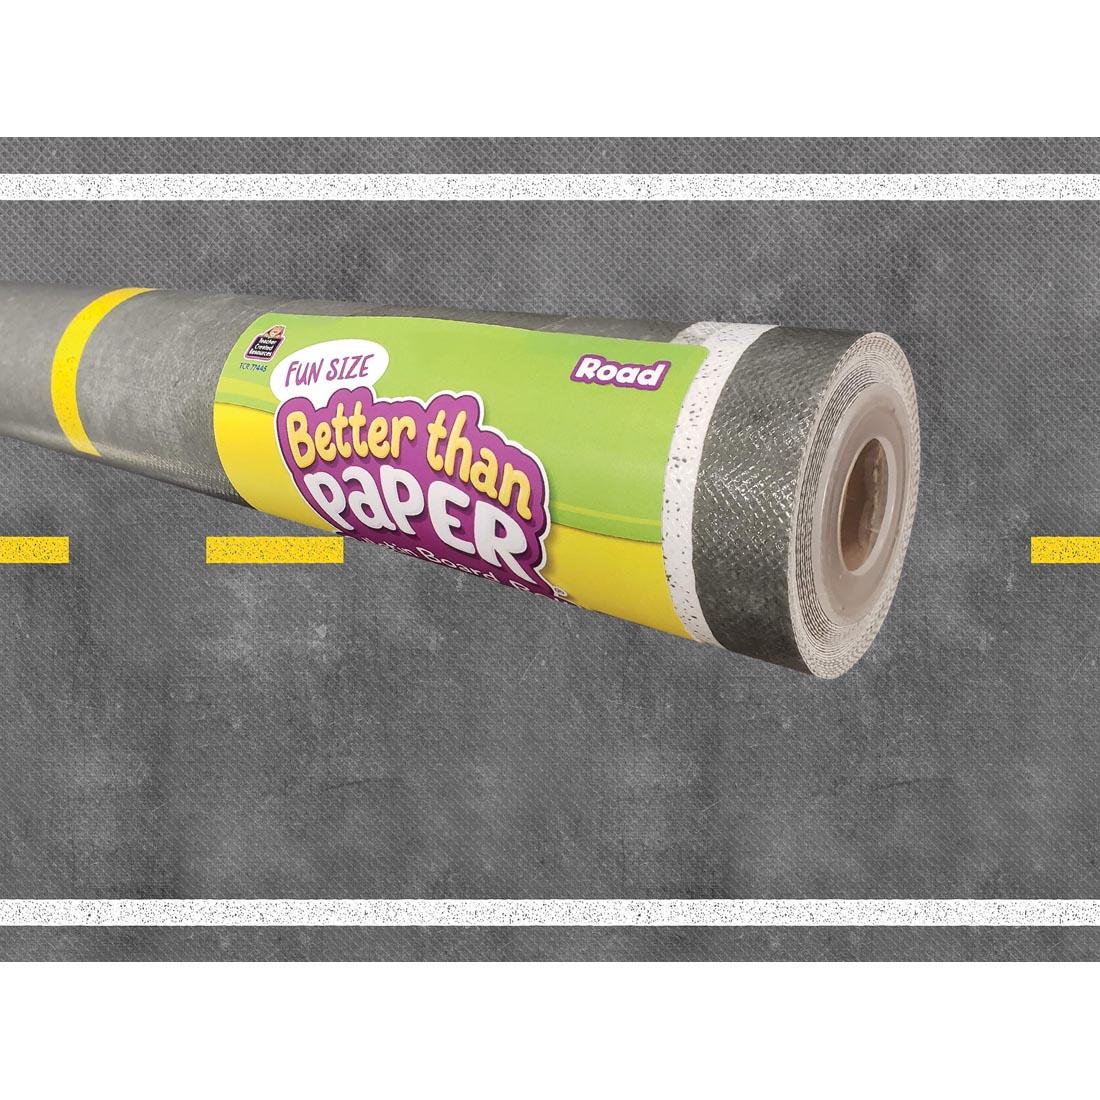 Road Fun Size Better Than Paper Bulletin Board Roll with it shown in use in the background